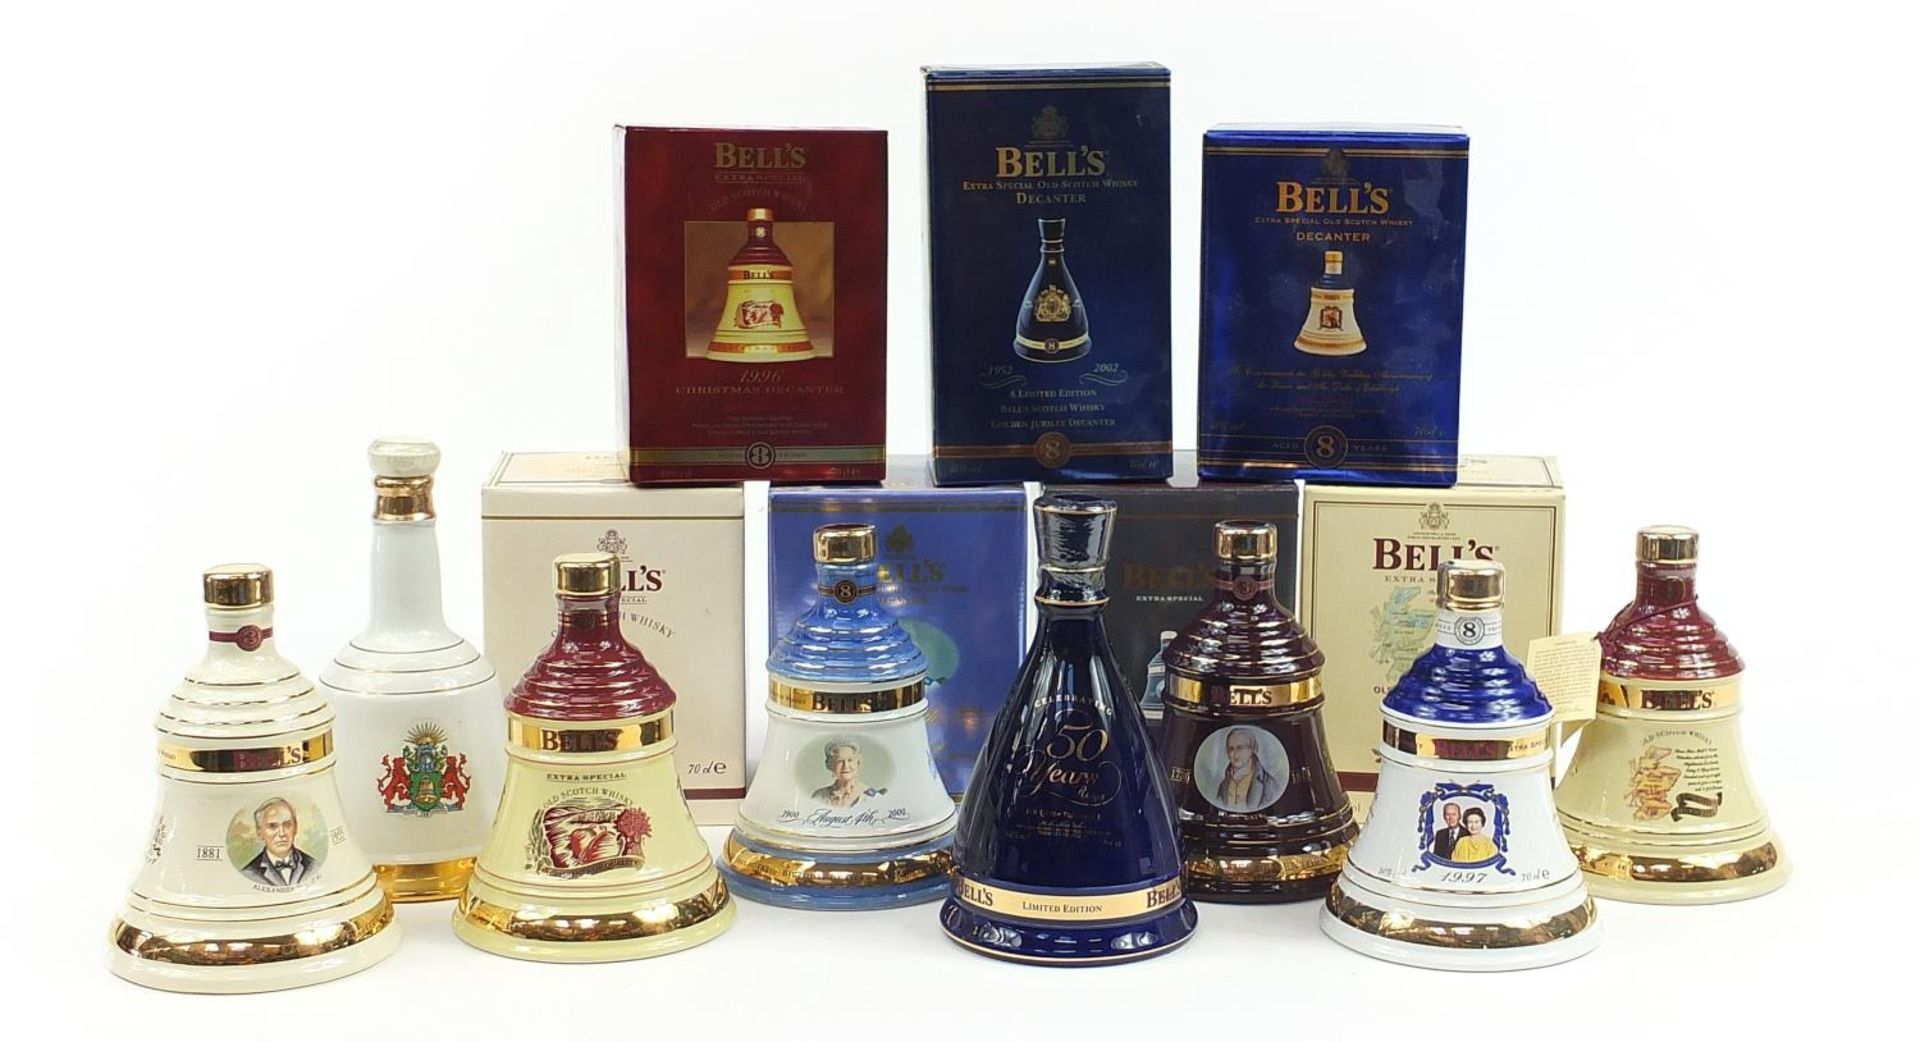 Eight Bells 8 Year whisky commemorative sealed decanters with contents, seven with boxes,